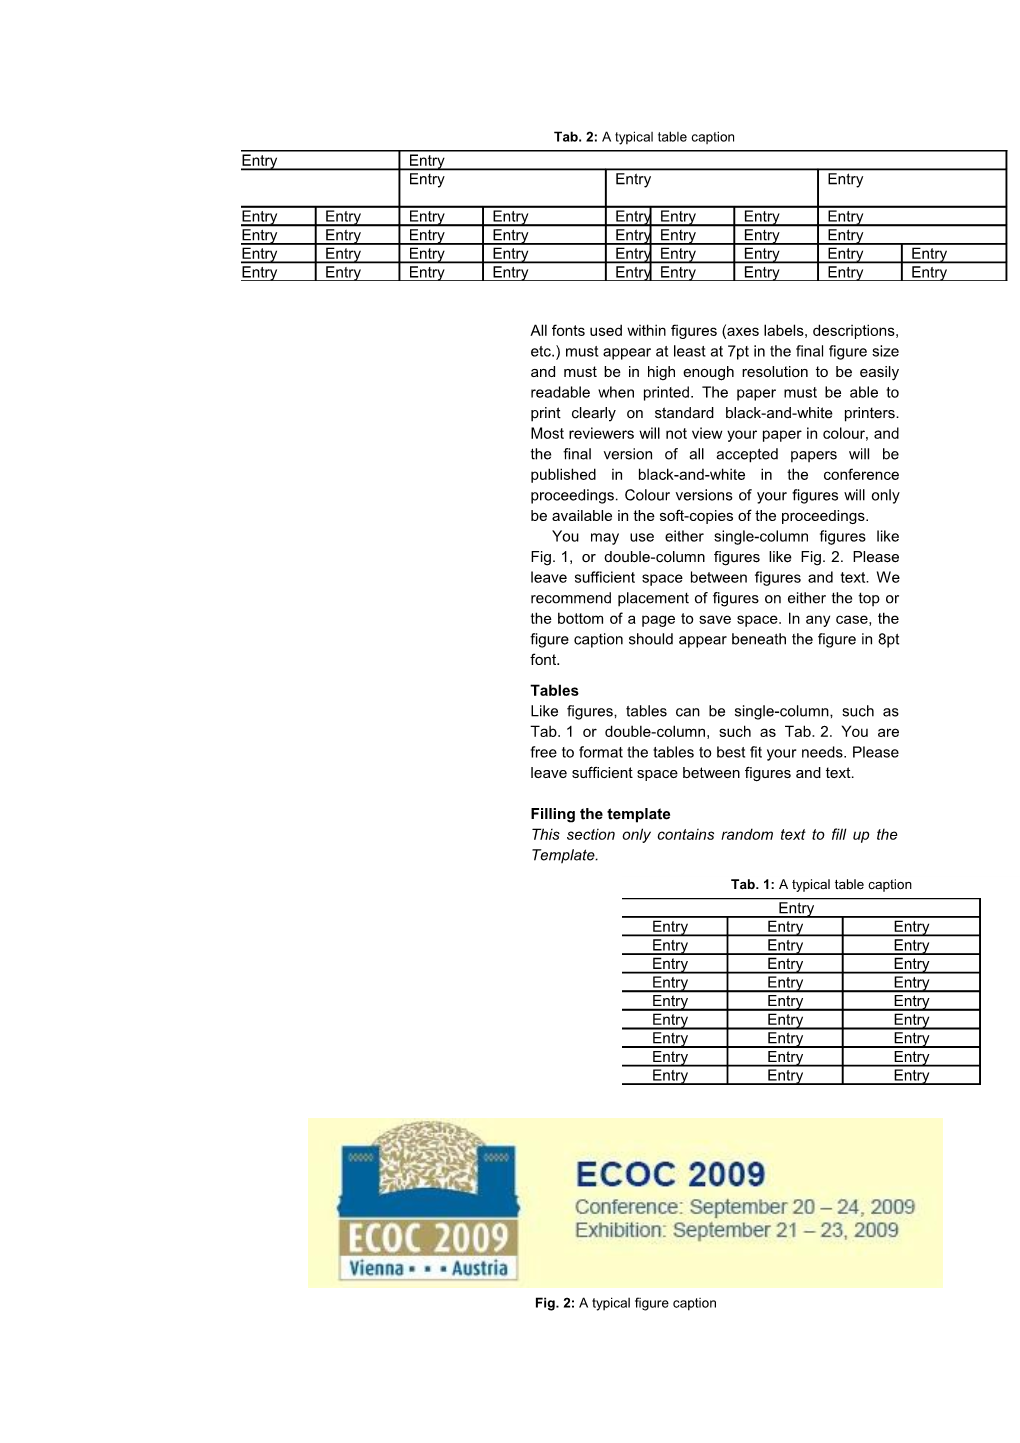 Title - Template for Papers ECOC 2004